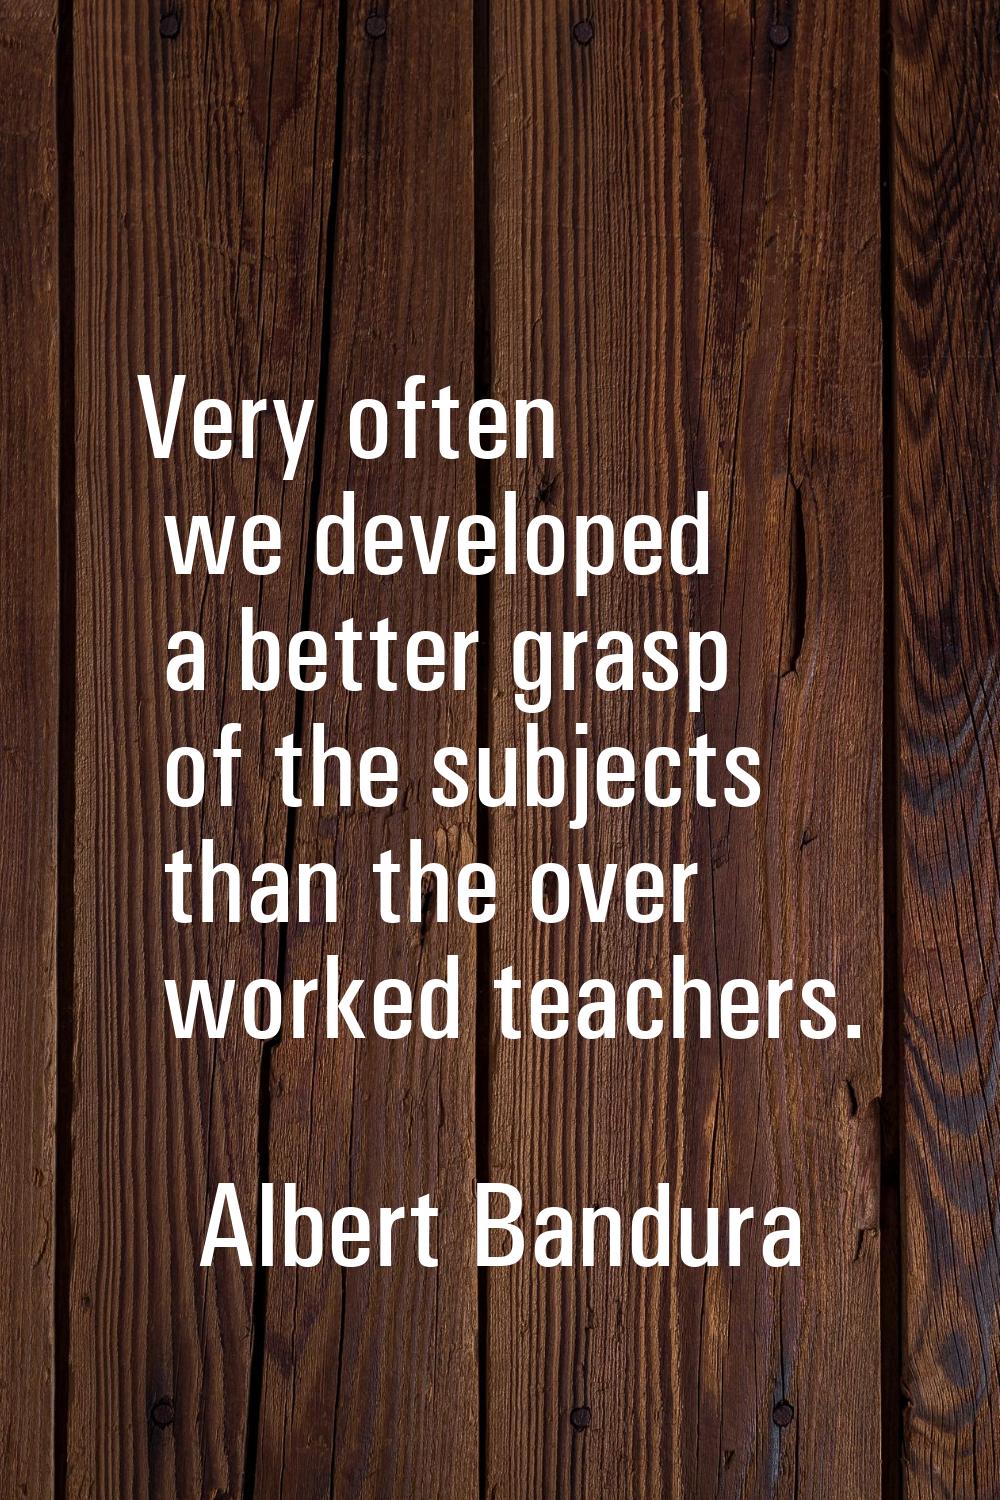 Very often we developed a better grasp of the subjects than the over worked teachers.